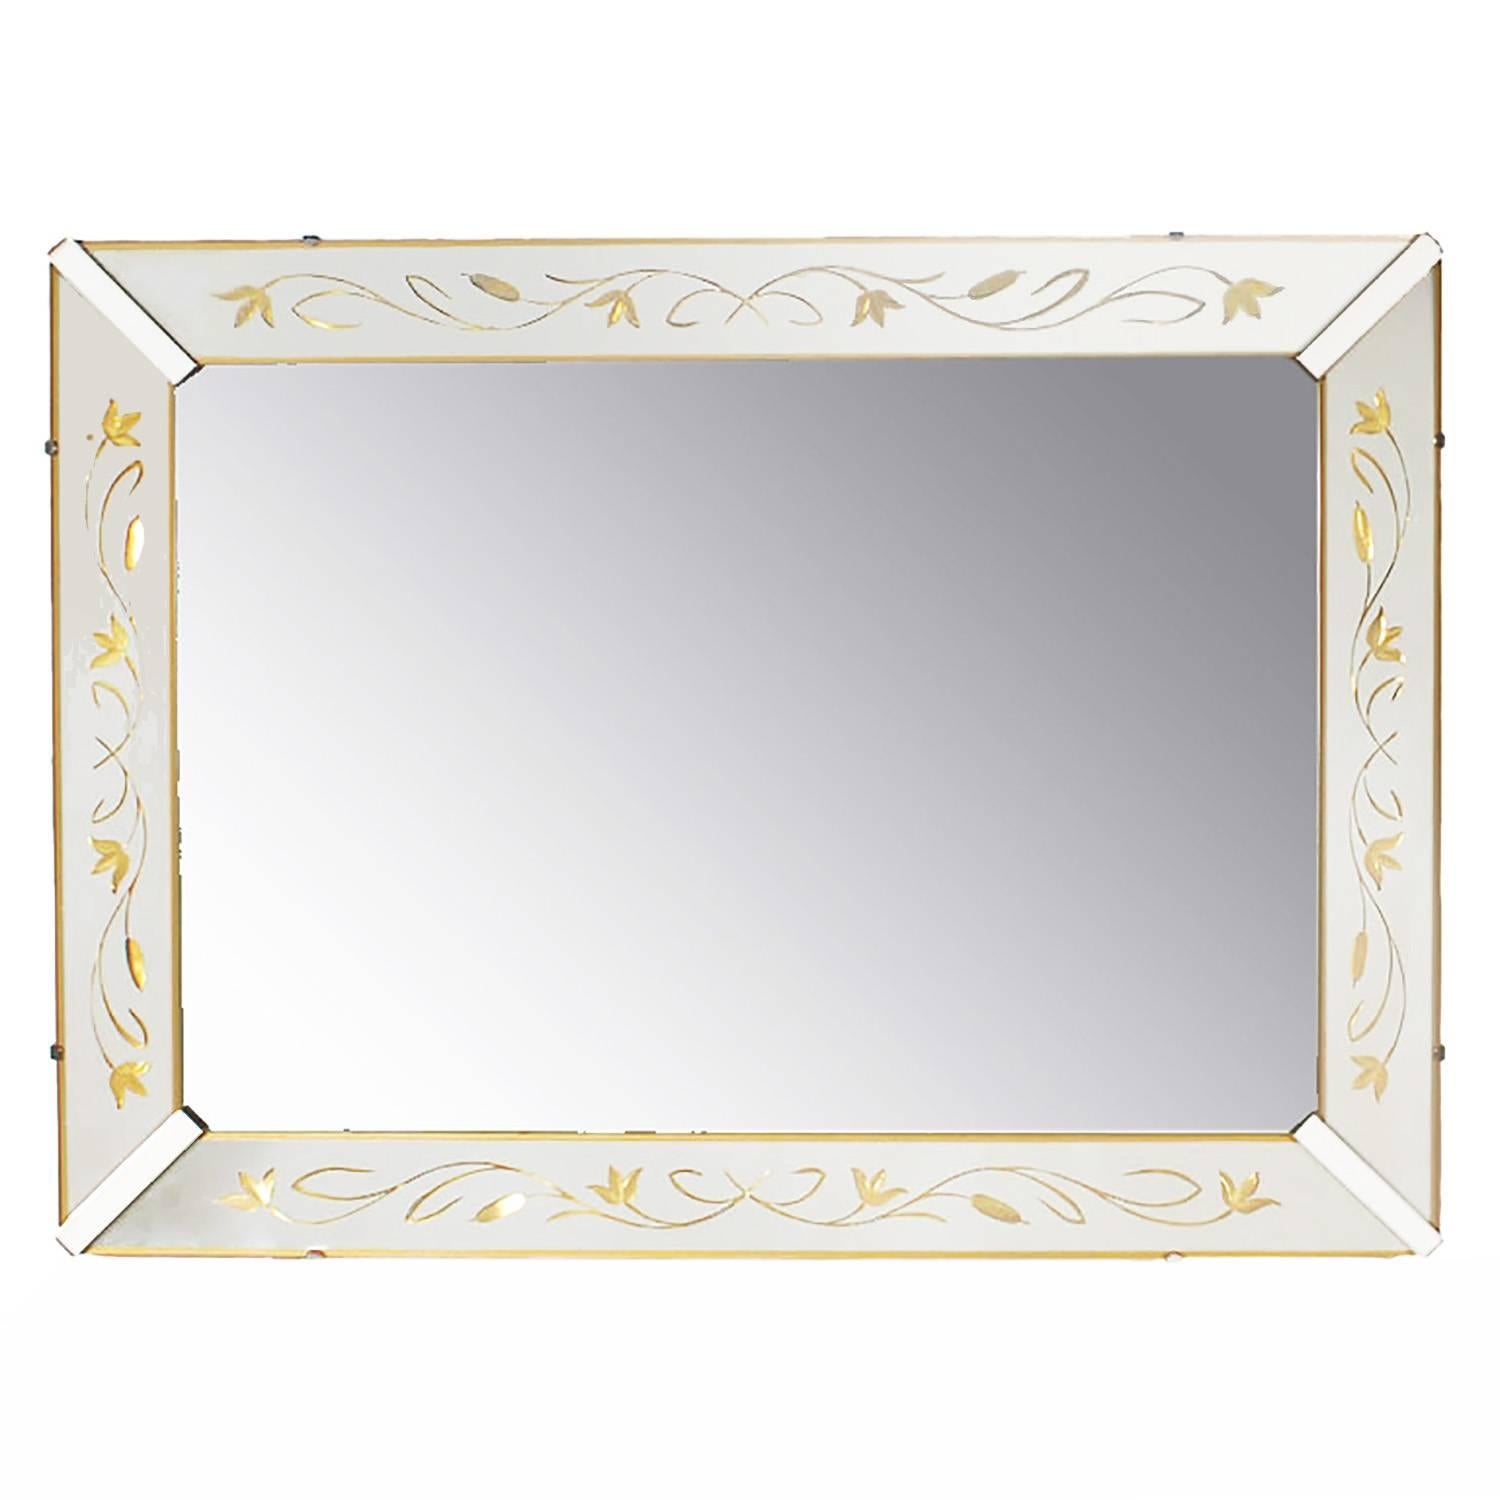 Etched and Reverse Gilt Mirrored Frame Art Deco Mirror with Foliate Detail